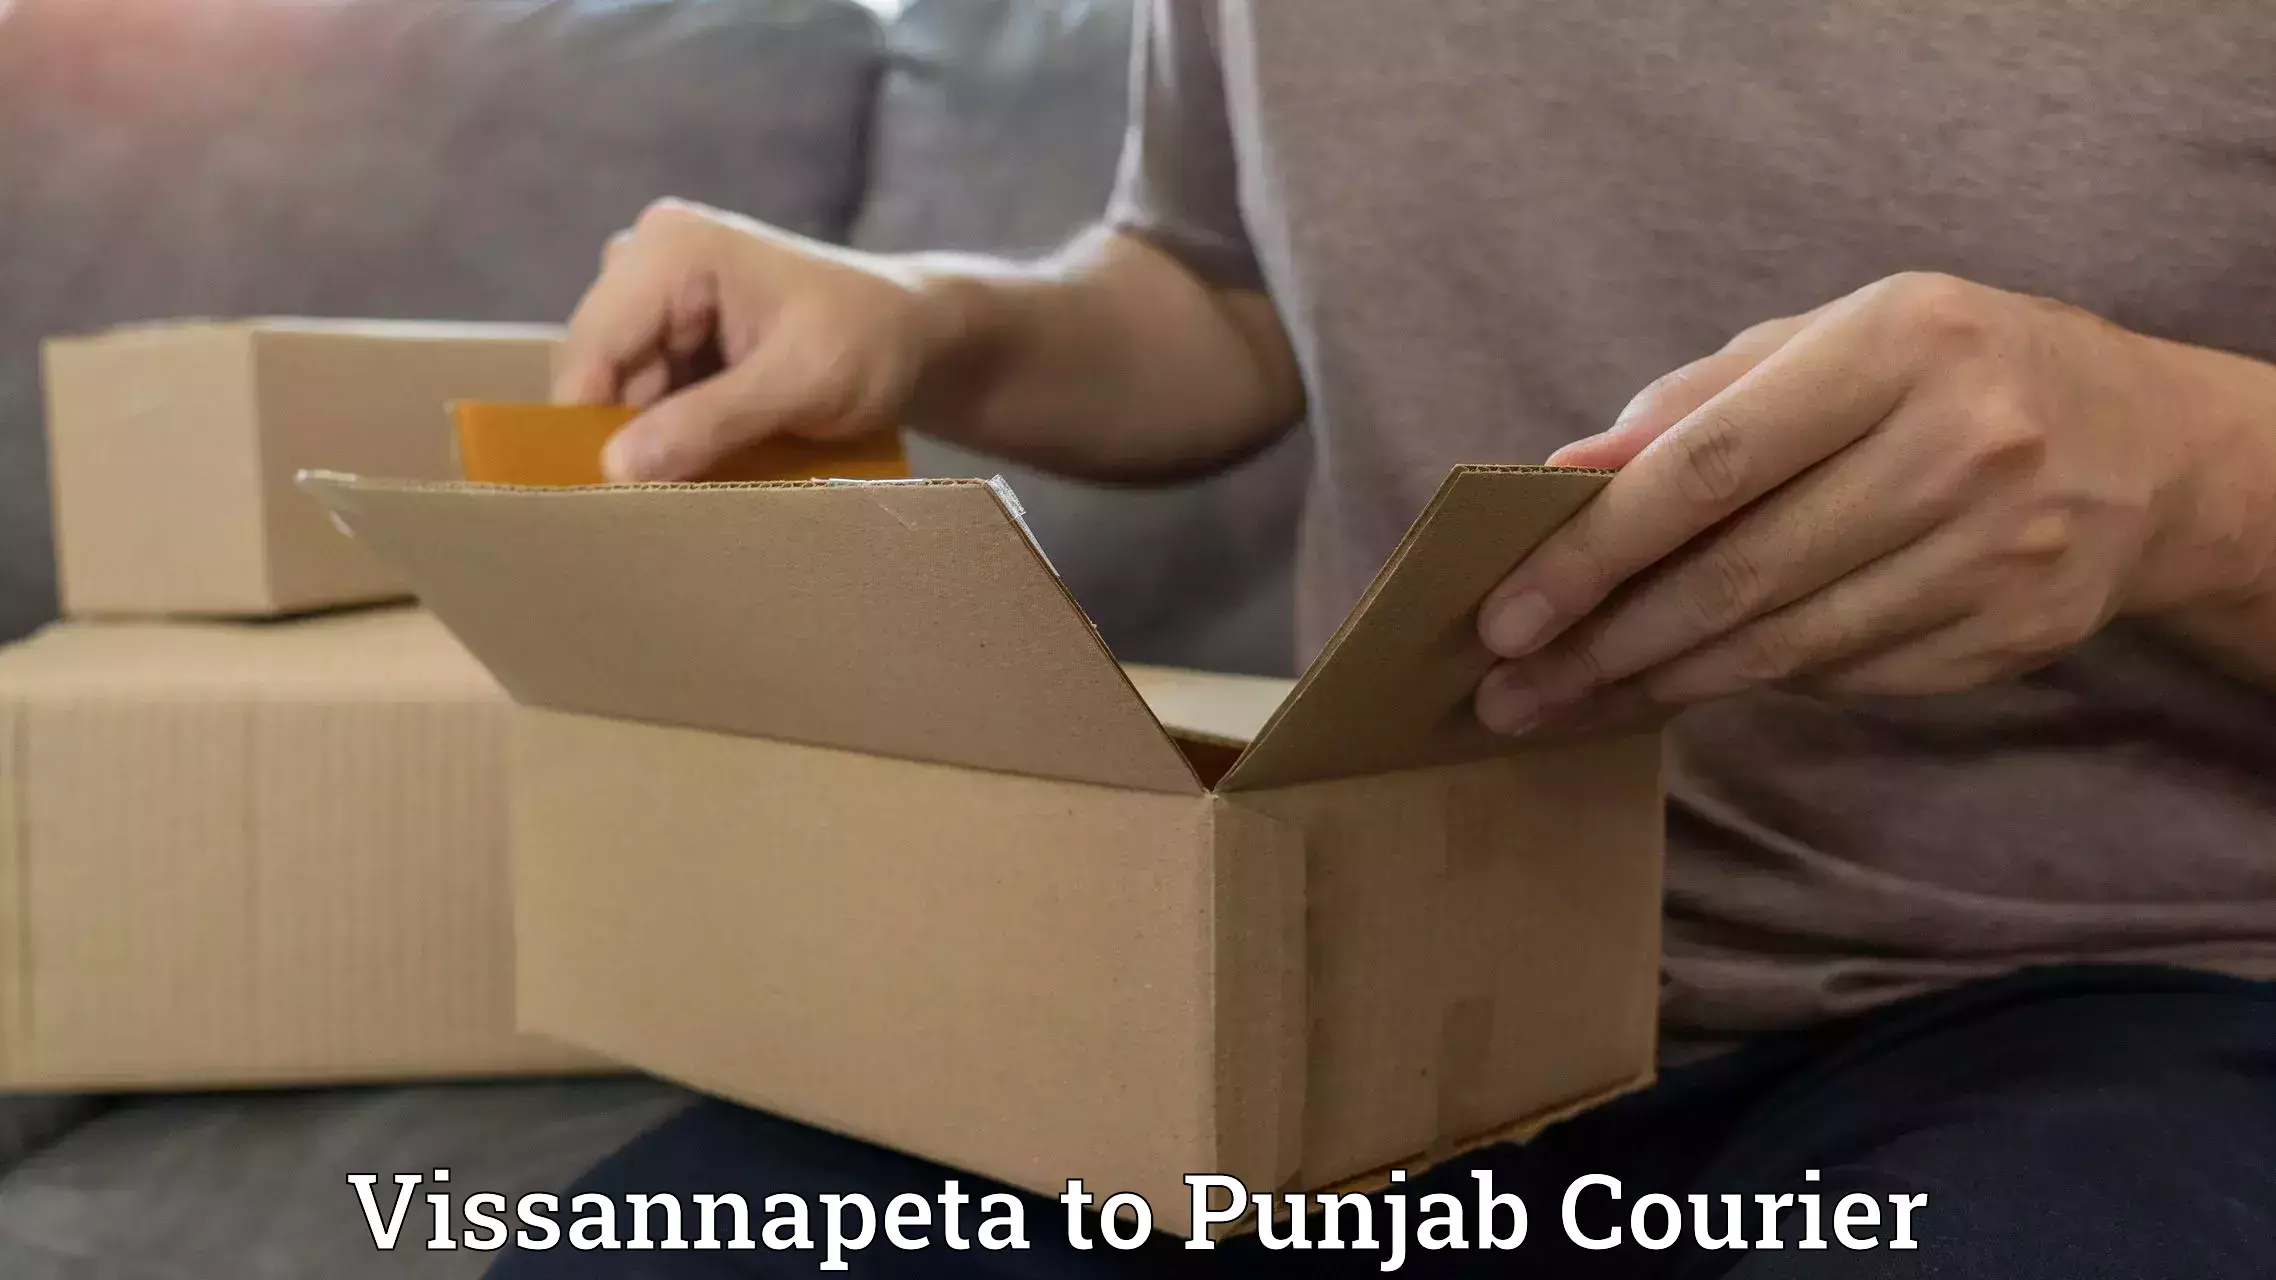 Personal courier services Vissannapeta to Amritsar